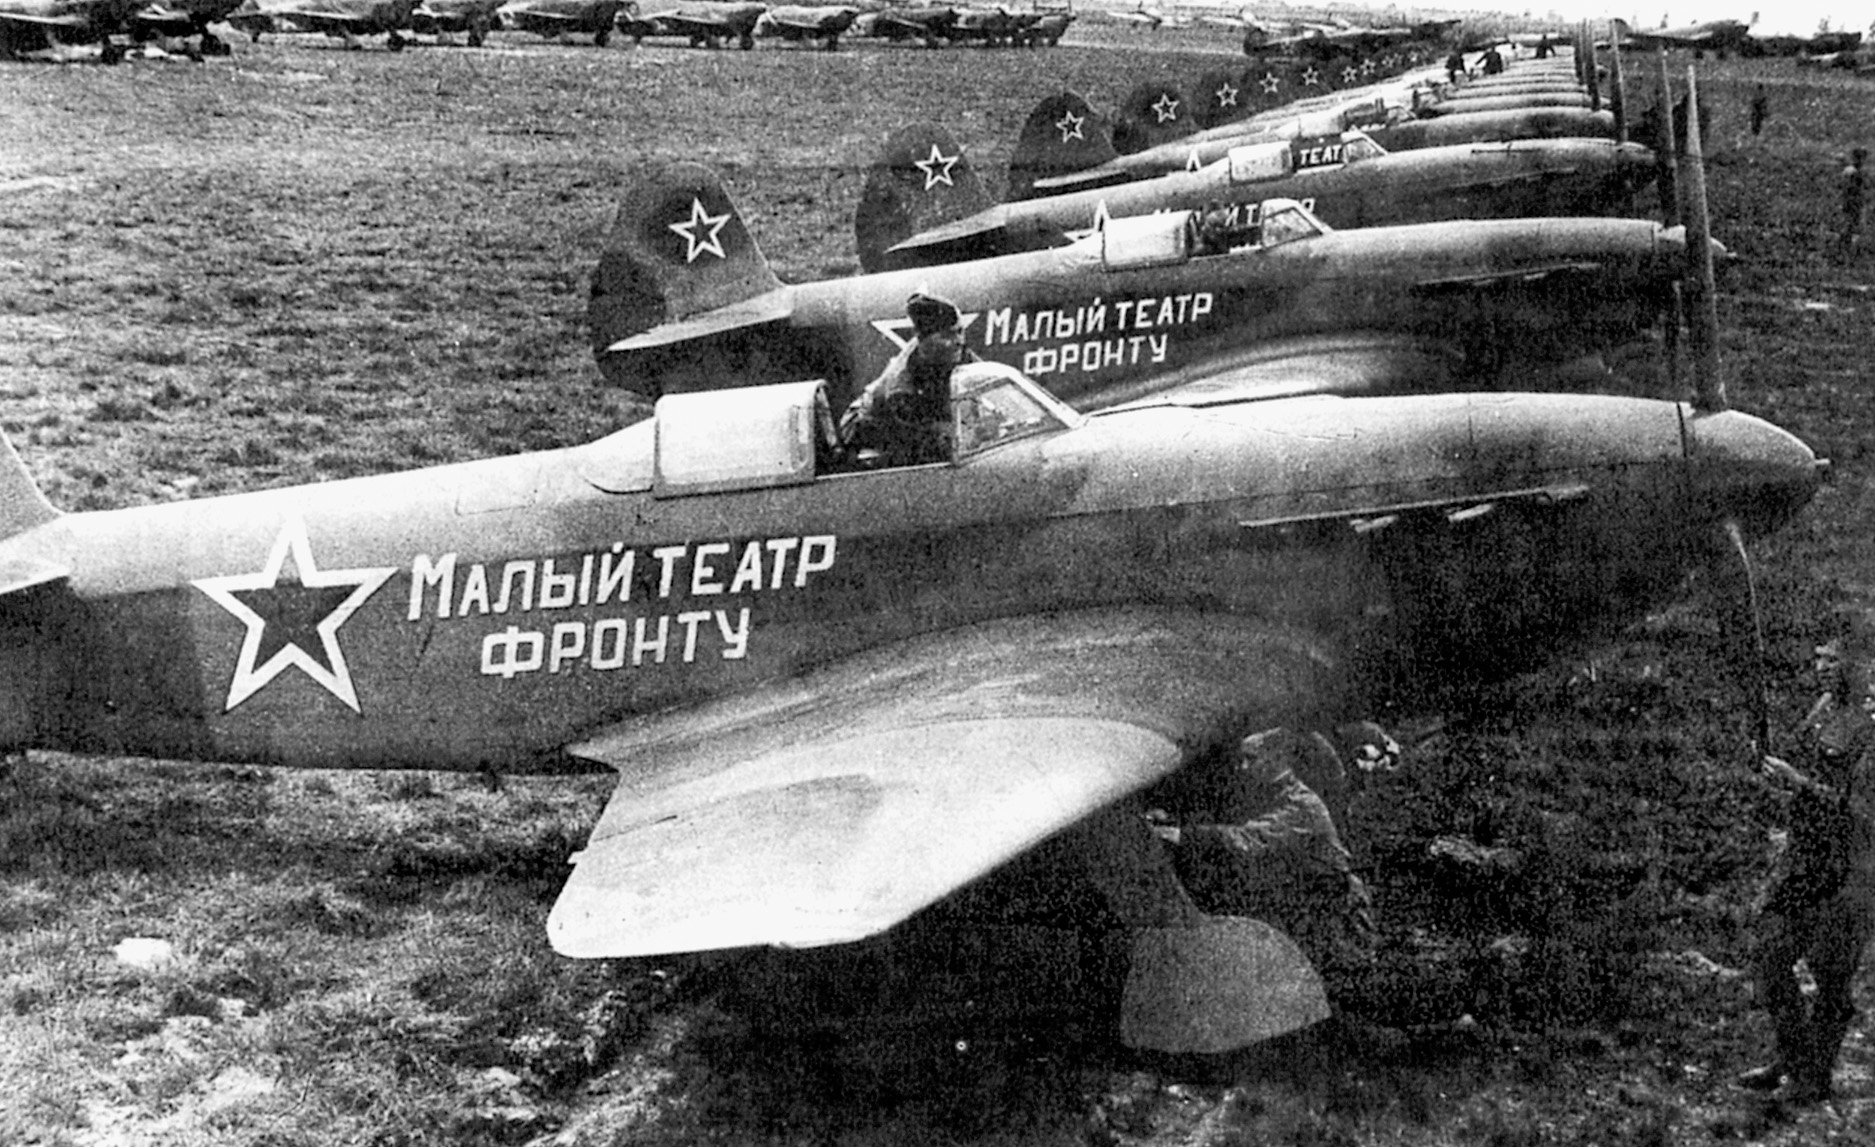 Produced by the Yakovlev factory, rows of Soviet Yak-1 fighter planes line a field. Lilya Litvak’s prowess for flying Yak fighters earned her the nickname of the“Rose of Stalingrad.”